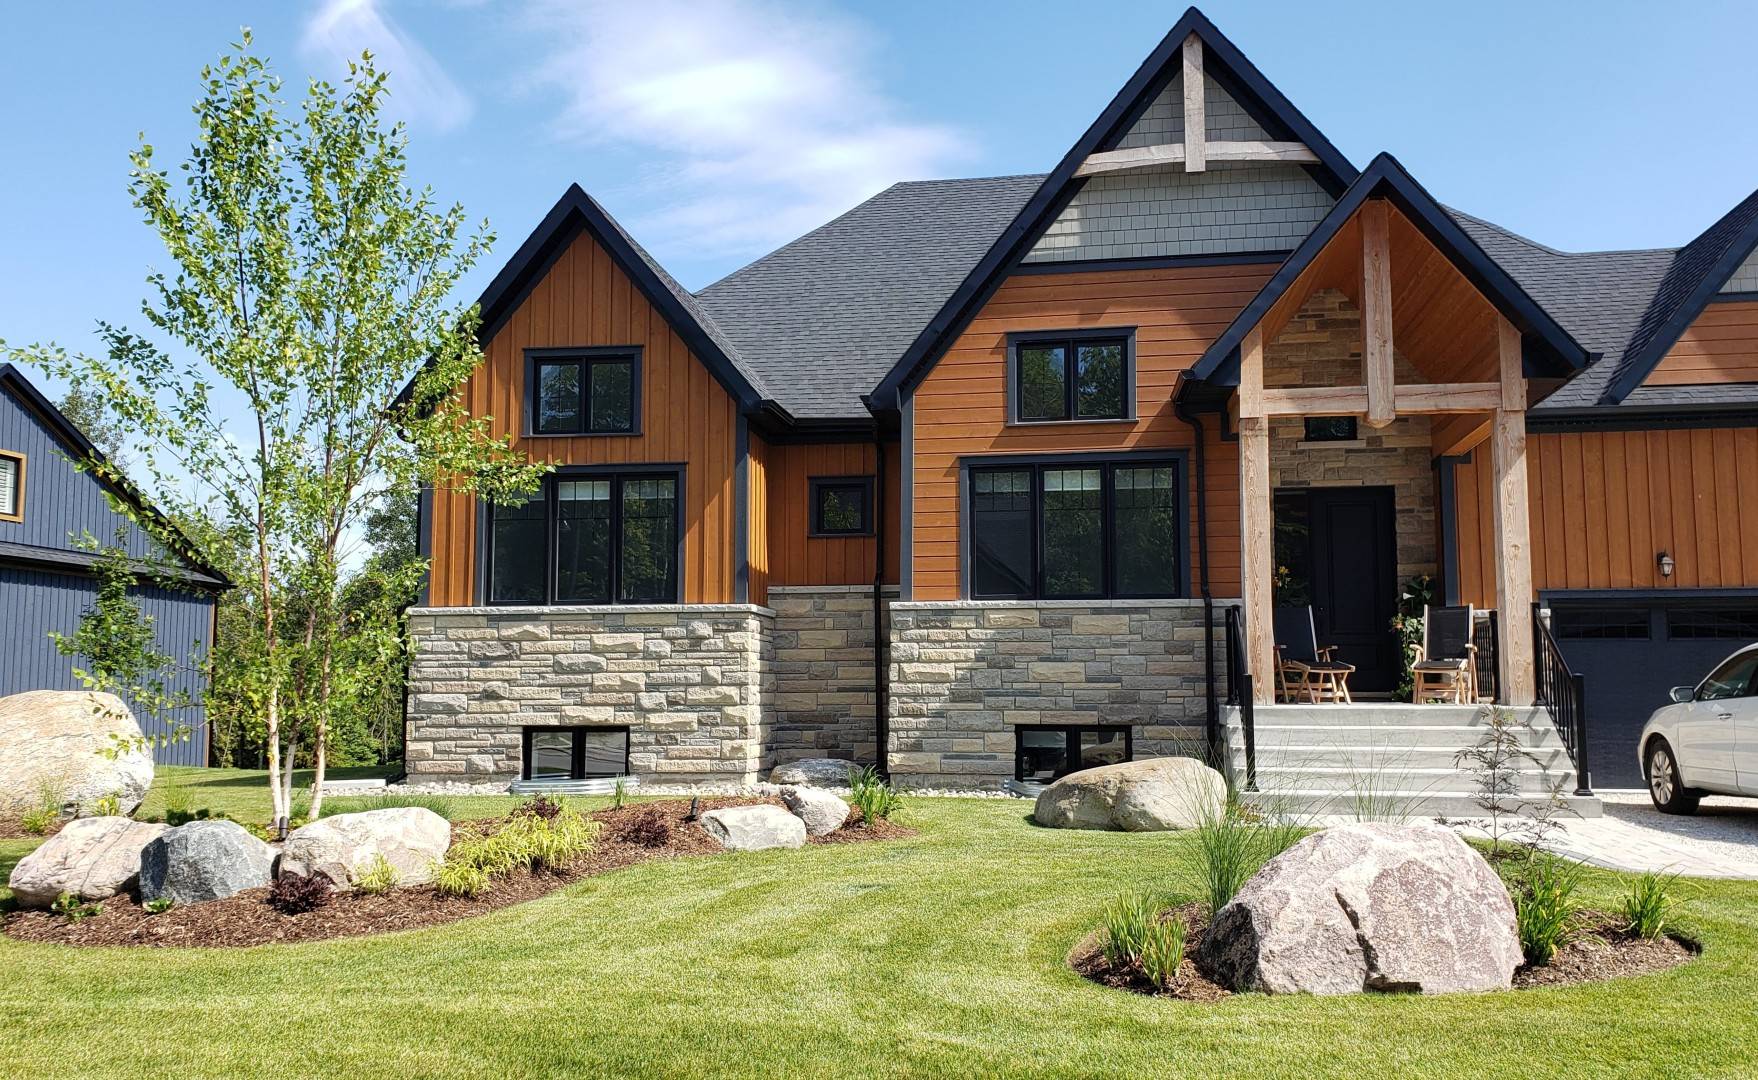 A modern house with a mix of dark siding and natural wood finishes, stone accents, large windows, a well-manicured lawn, and a clear blue sky.